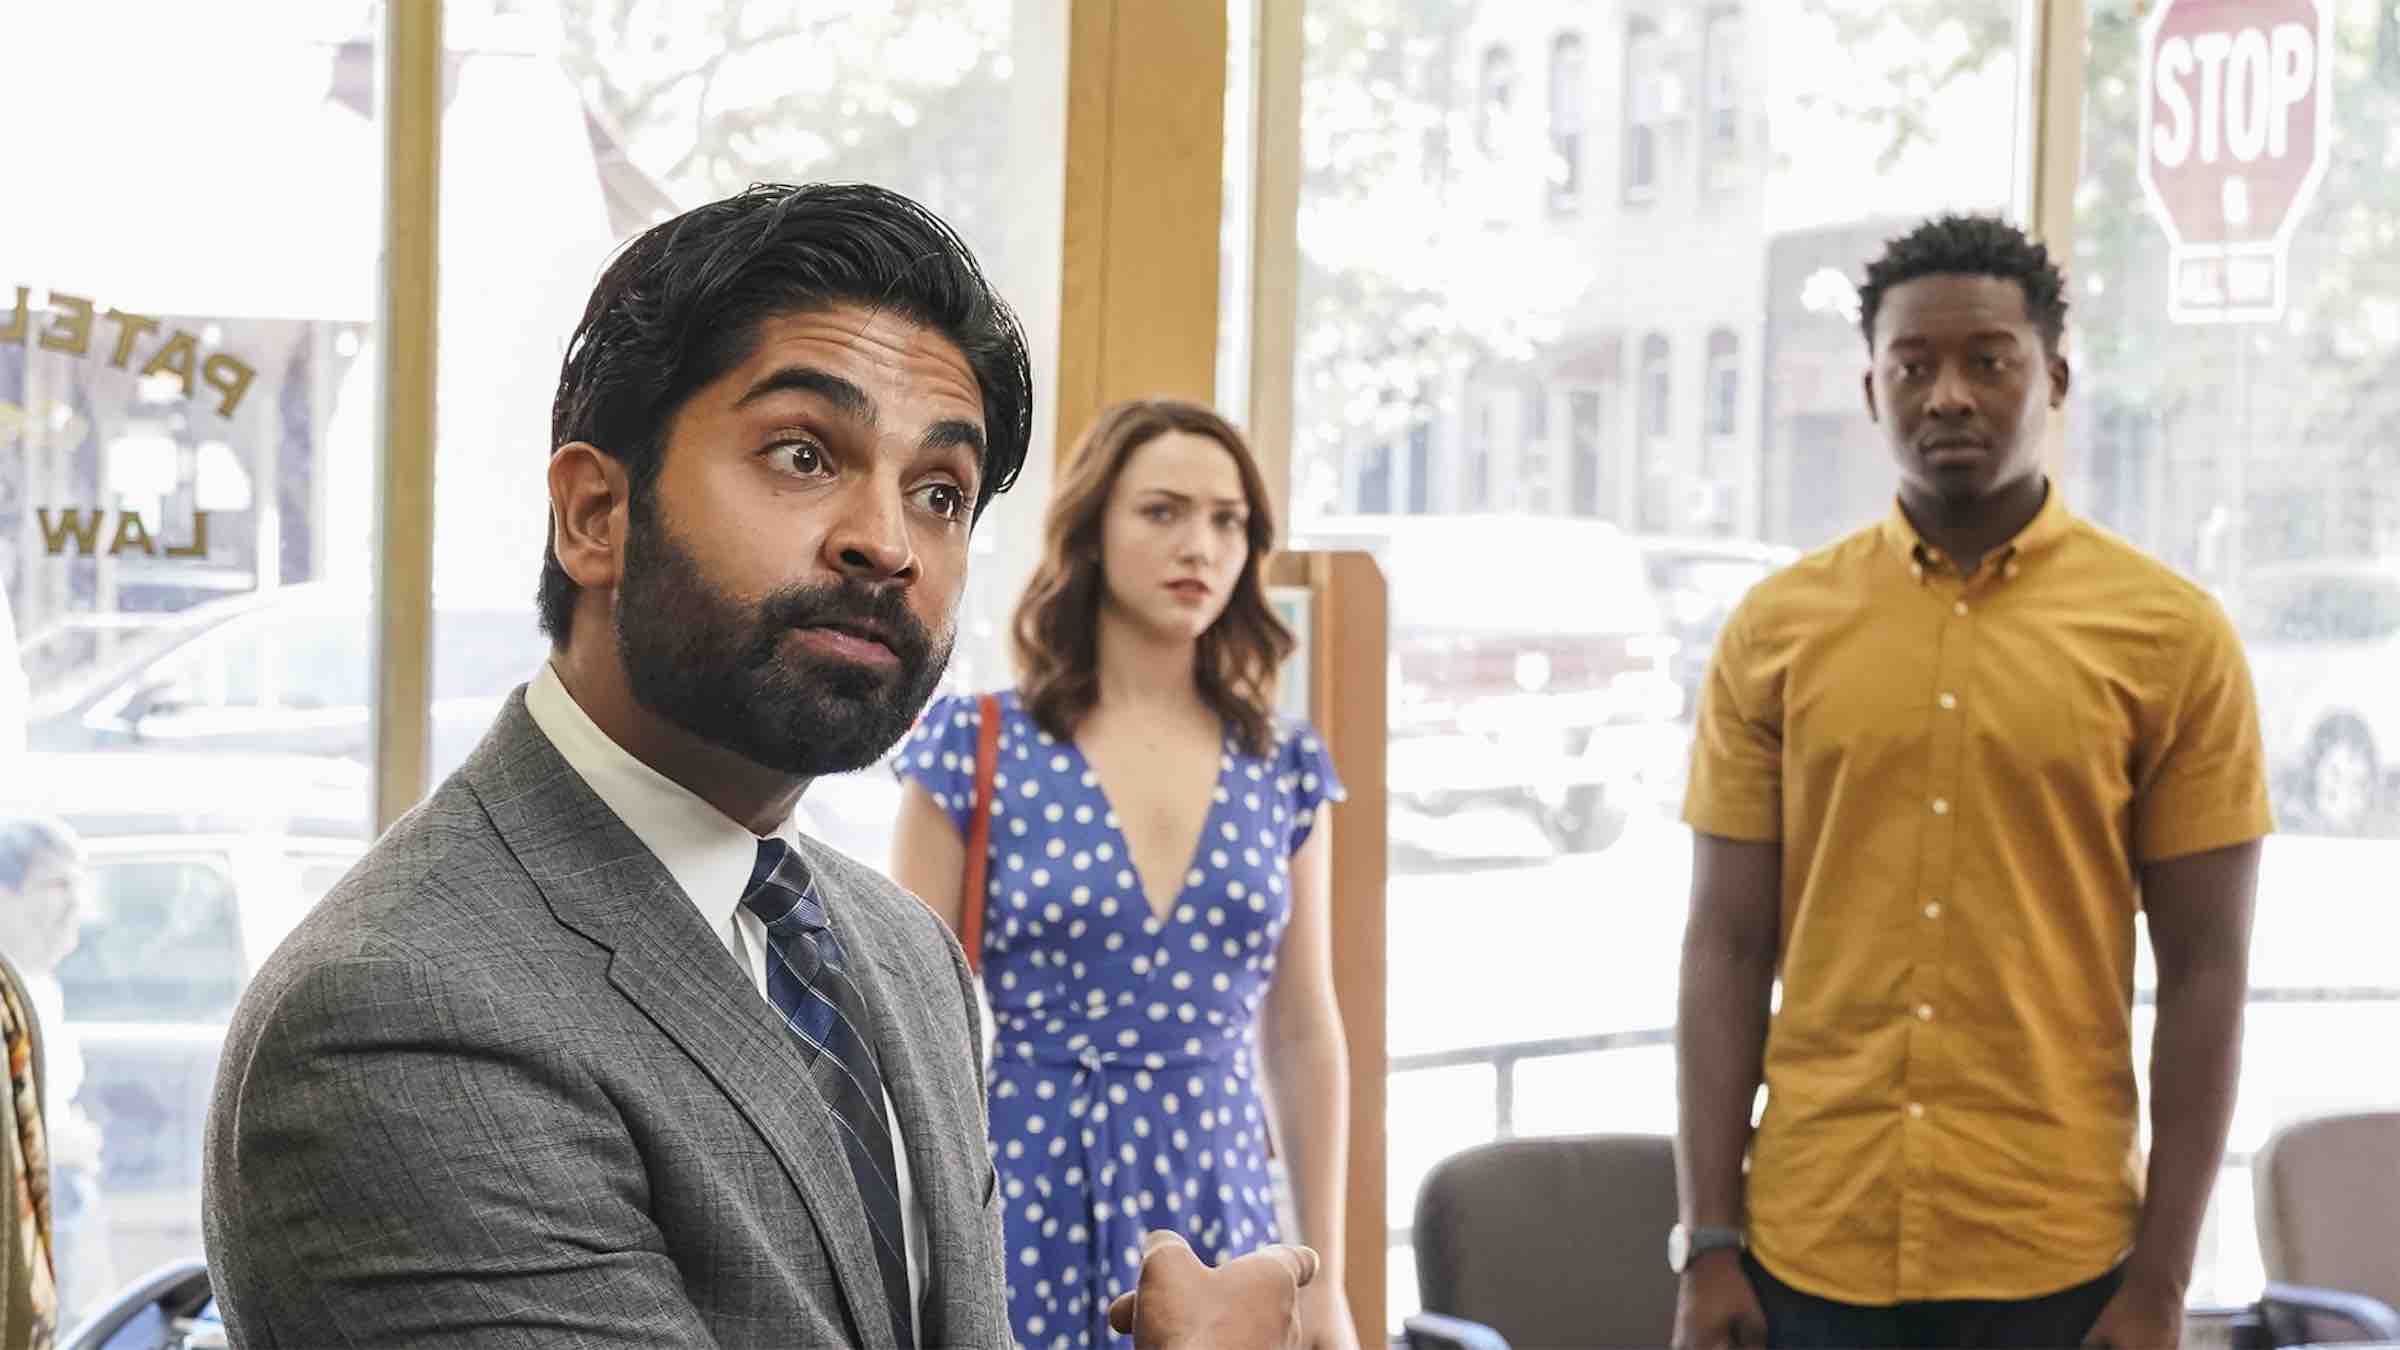 'God Friended Me', the CBS dramedy is well into his second season. Here’s why you should check in on 'God Friended Me' season 2.